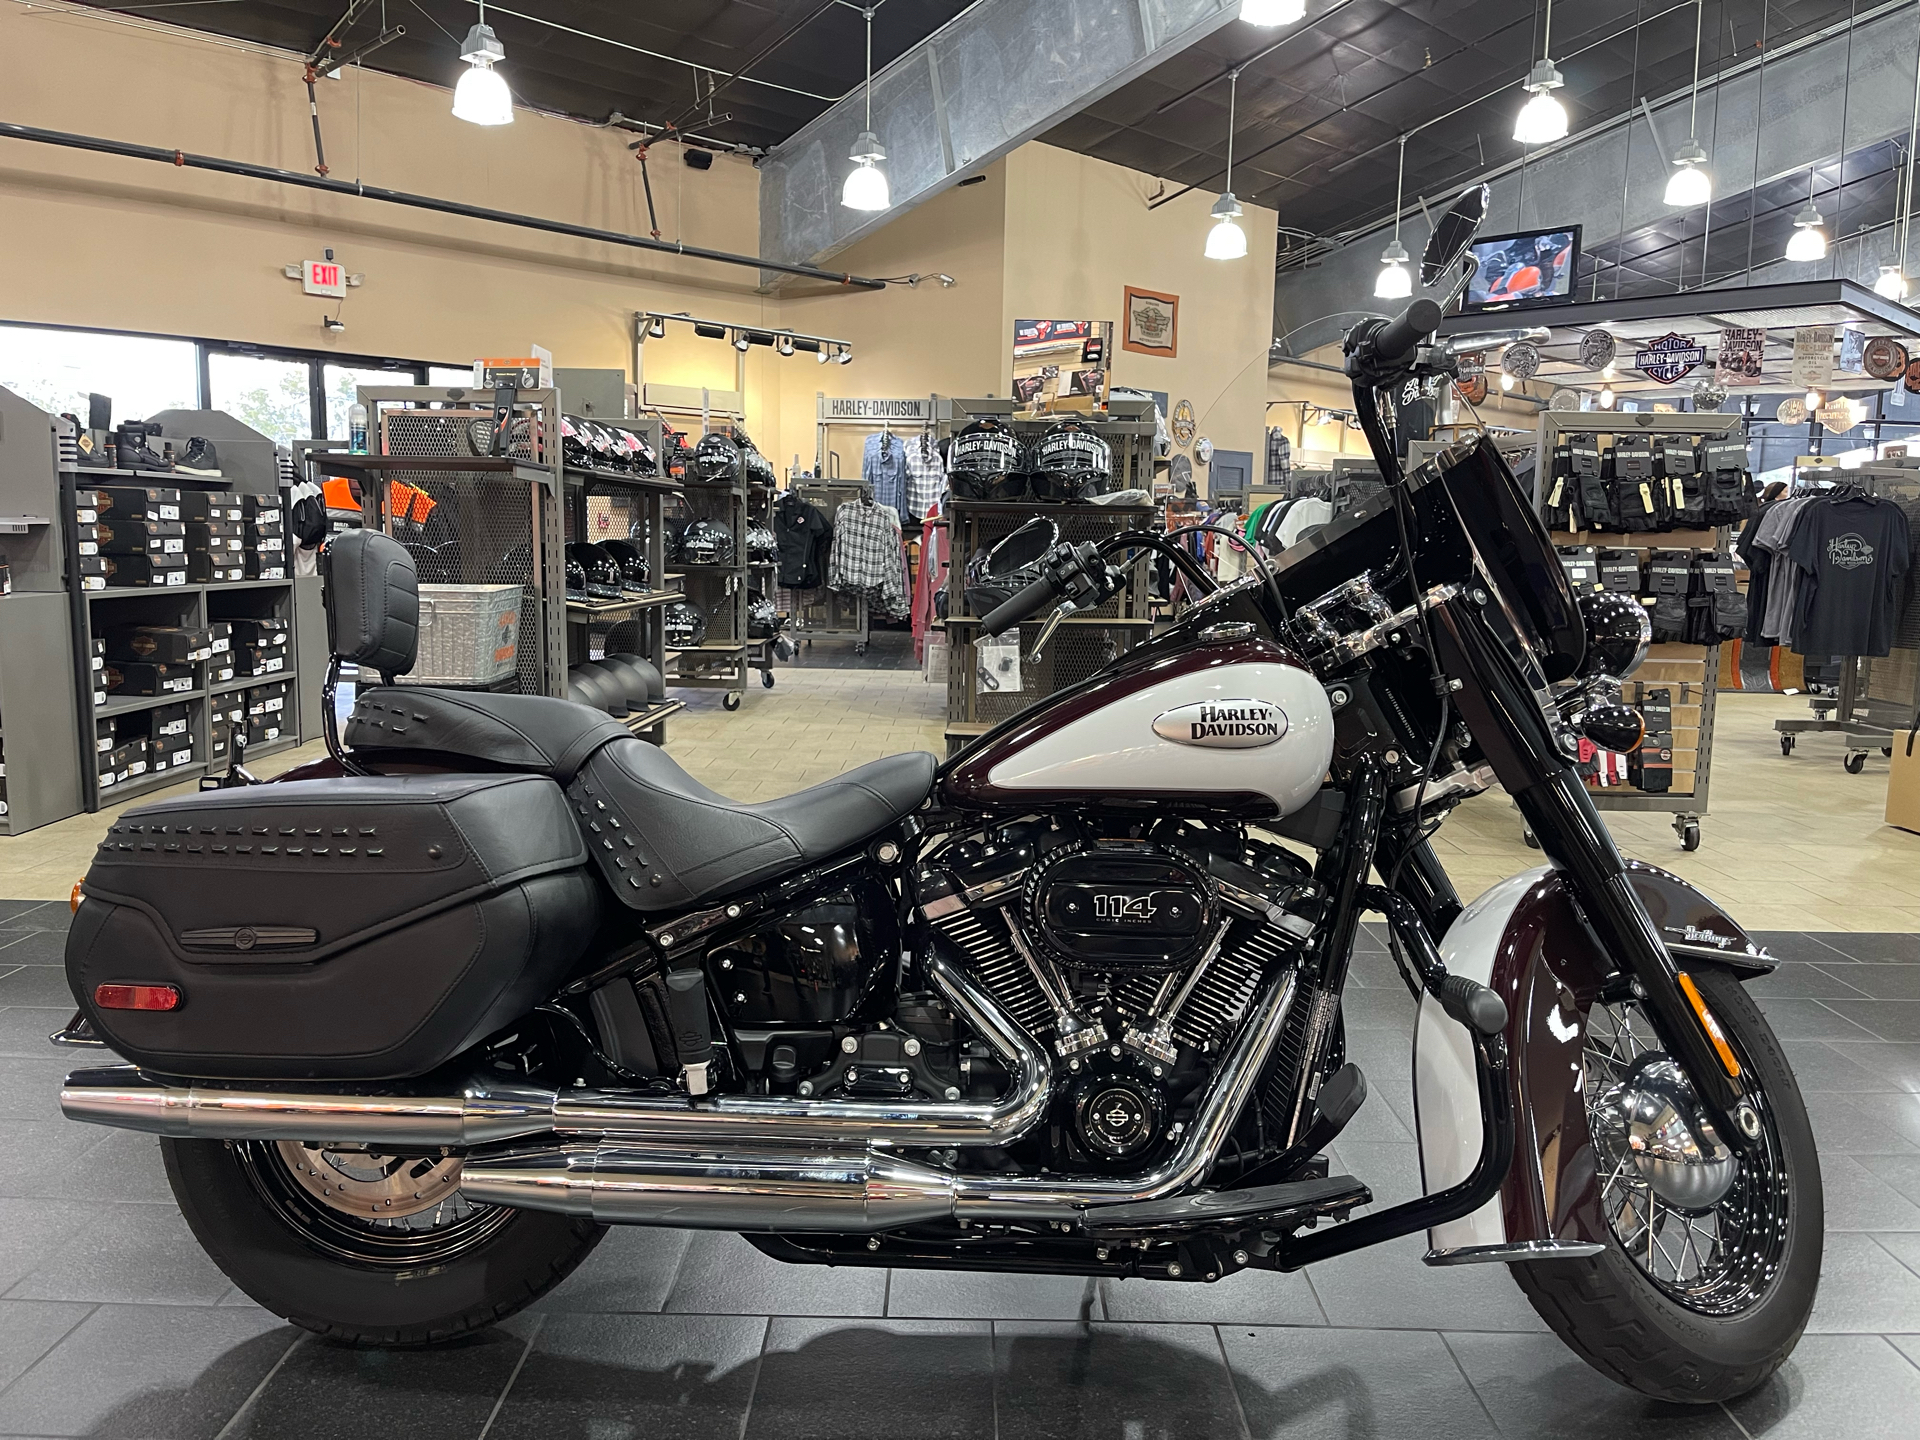 2021 Harley-Davidson Heritage Classic 114 in The Woodlands, Texas - Photo 1